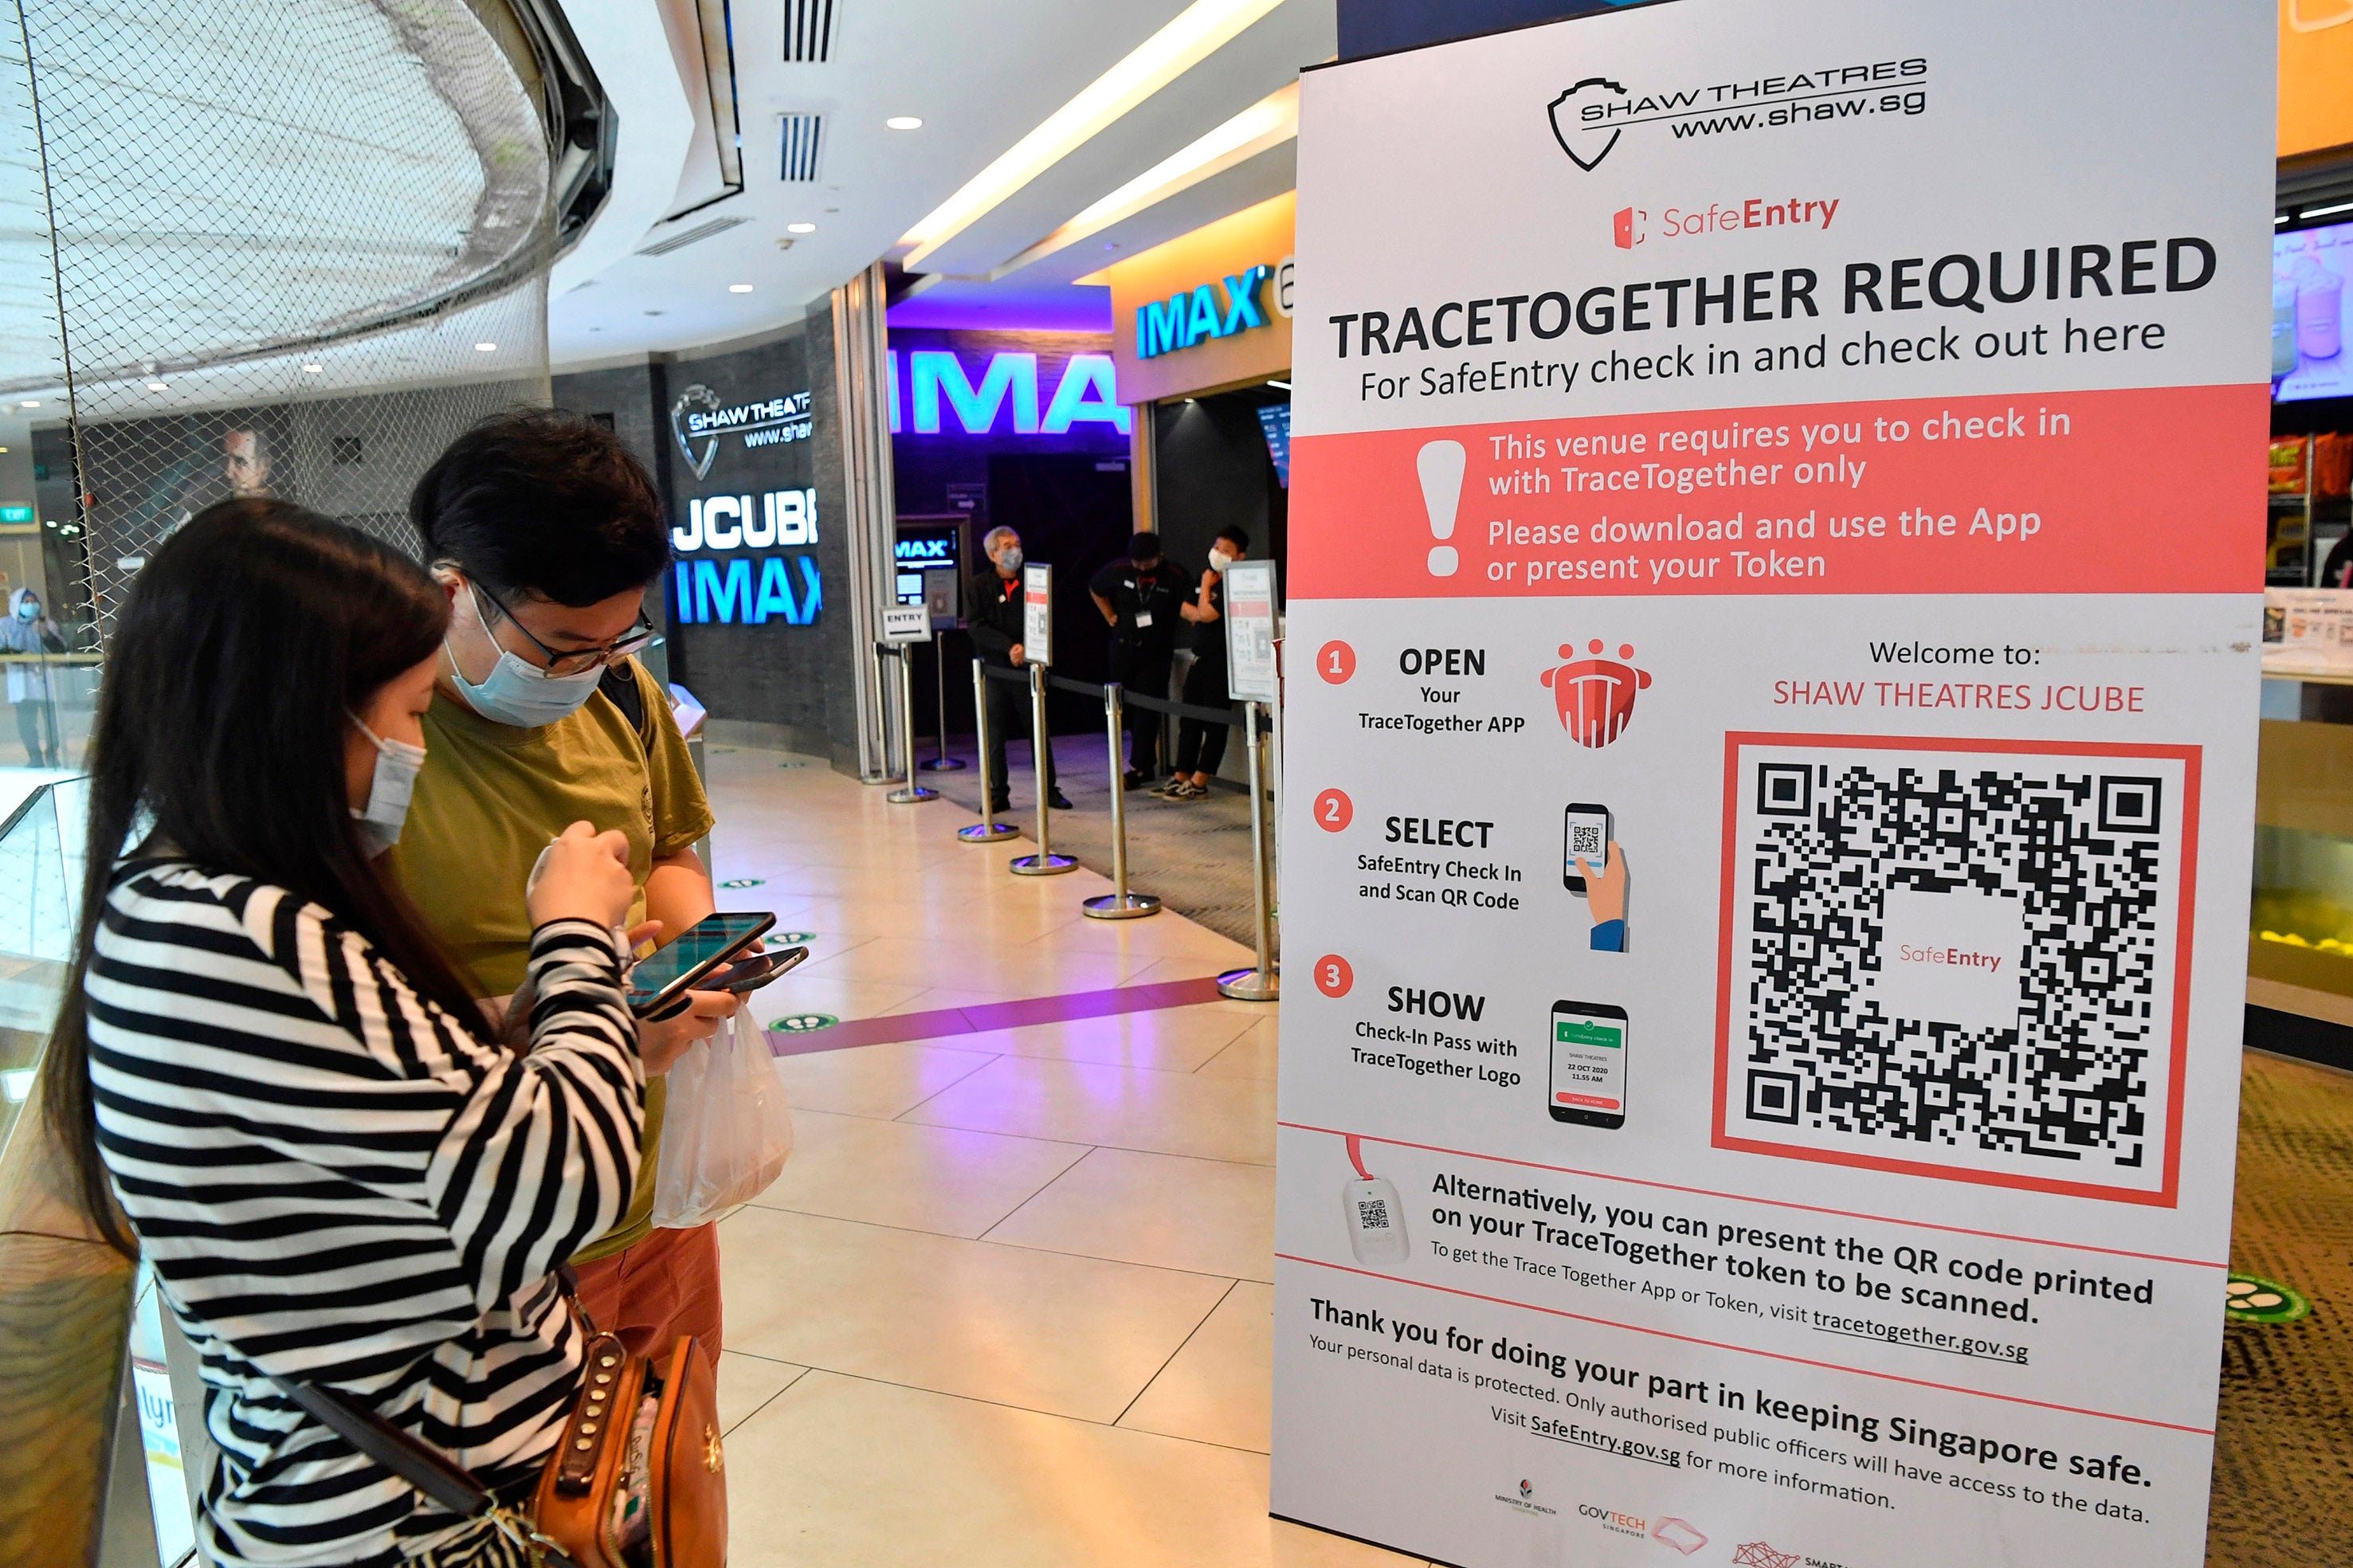 Cinemagoers downloading the TraceTogether app on their mobile phones to check in before entering Shaw Theatres at JCube mall in Singapore, October 31, 2020.